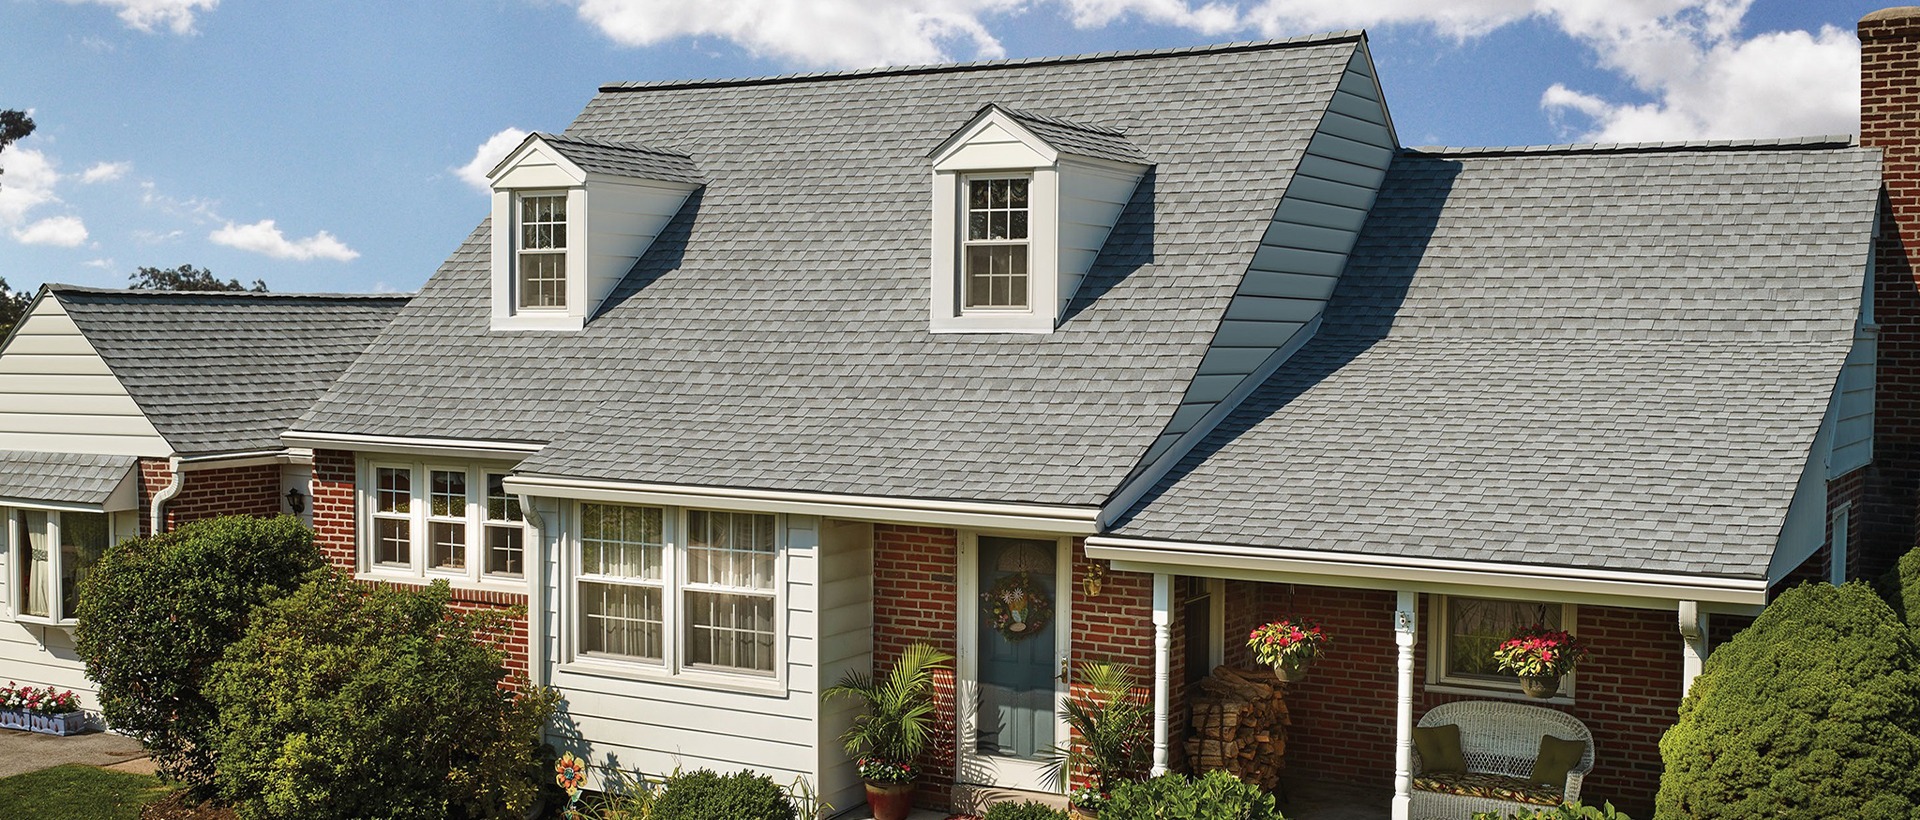 Learn About Different Roof Types and Their Common Issues!